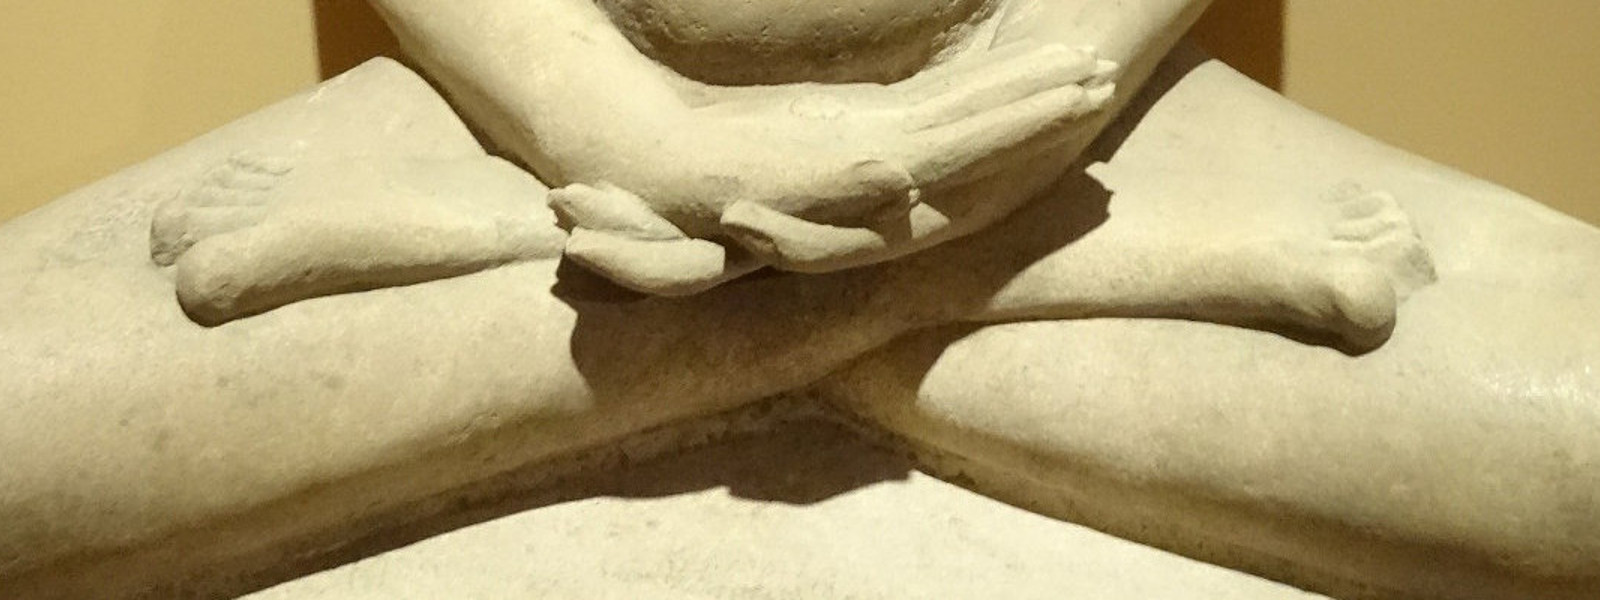 The legs of a seated statue of the Buddha, siting in the diamond position, or Vajrasana.